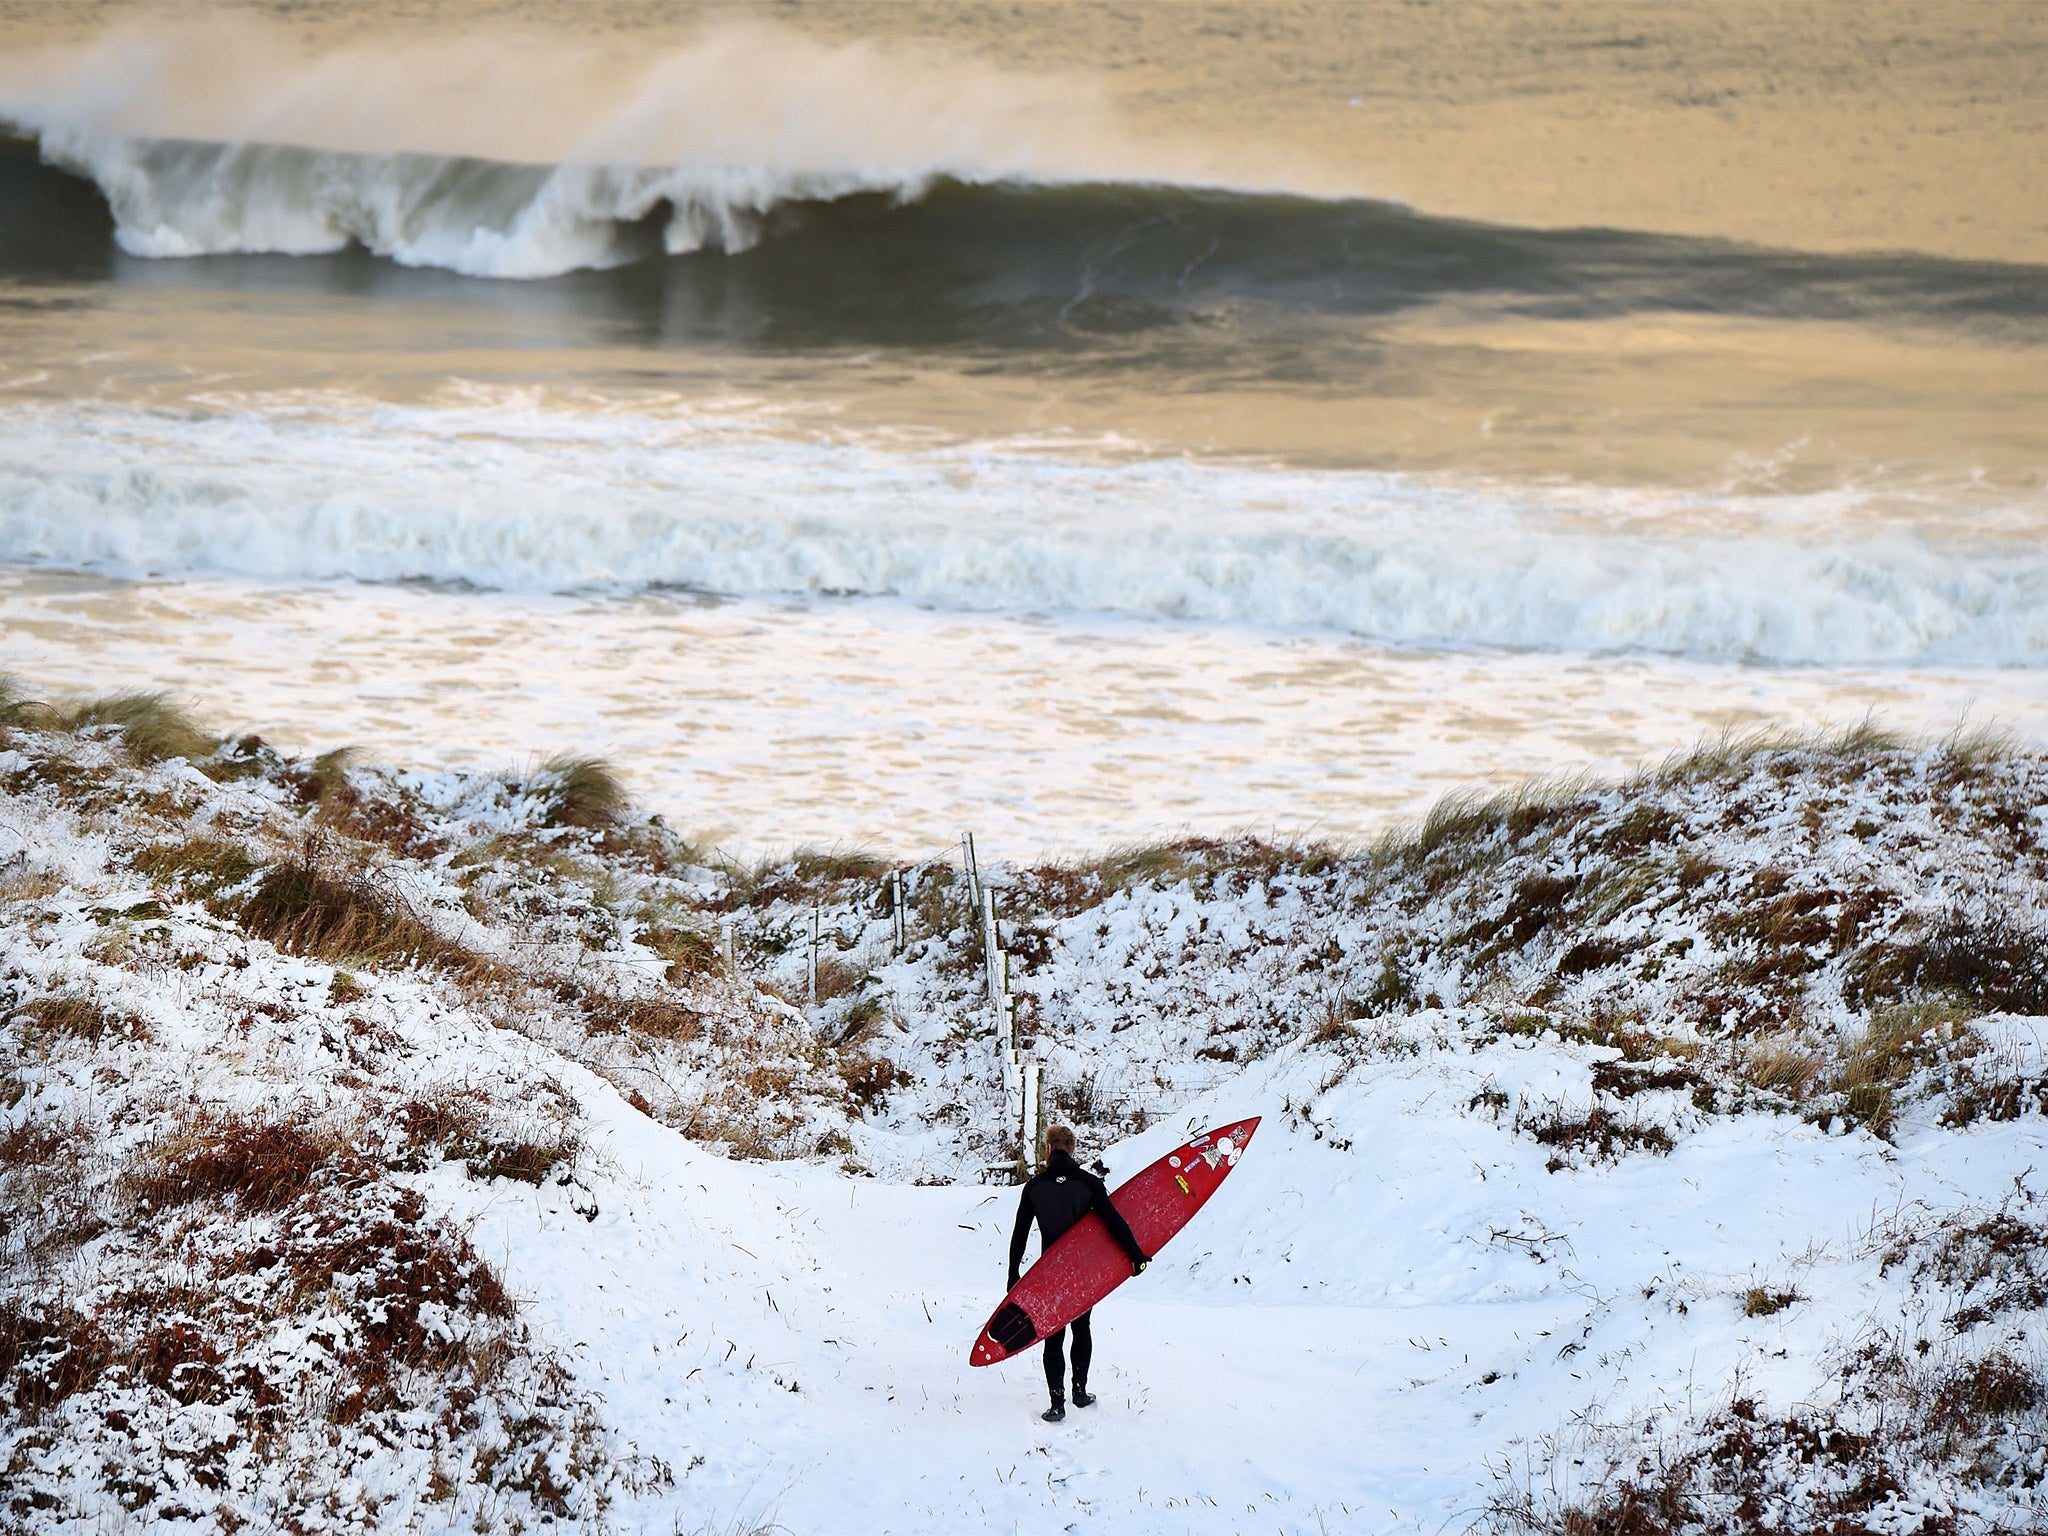 A surfer makes his way towards the beach at Portrush in Antrim, Northern Ireland, on Wednesday, where heavy snowfall led to traffic disruption and school closures